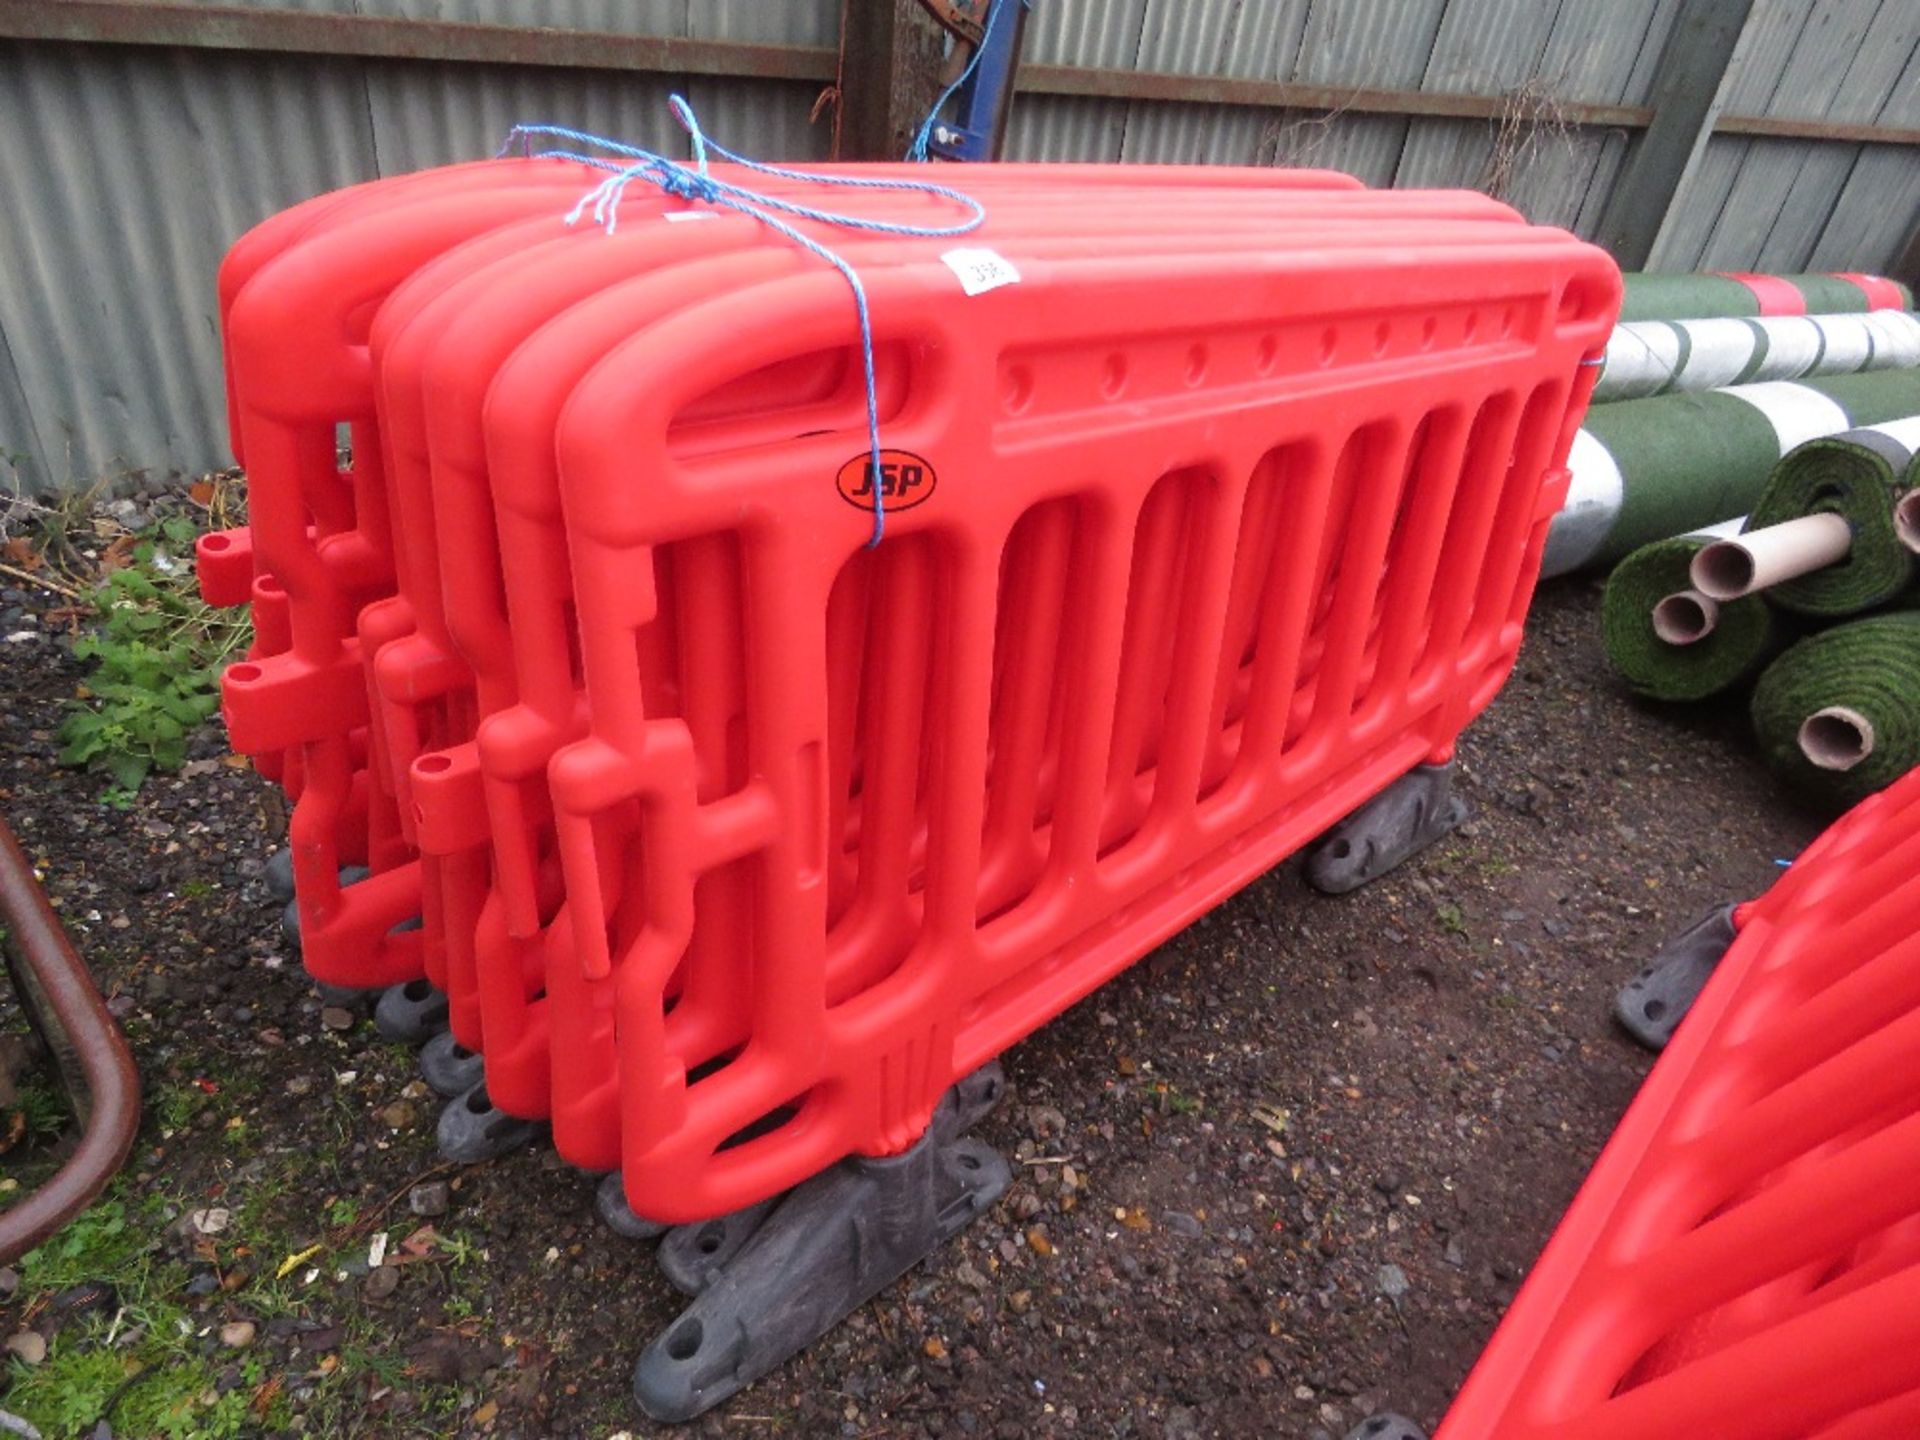 10 X JSP PLASTIC CHAPTER 8 BARRIERS, APPEAR UNUSED/LITTLE USED.